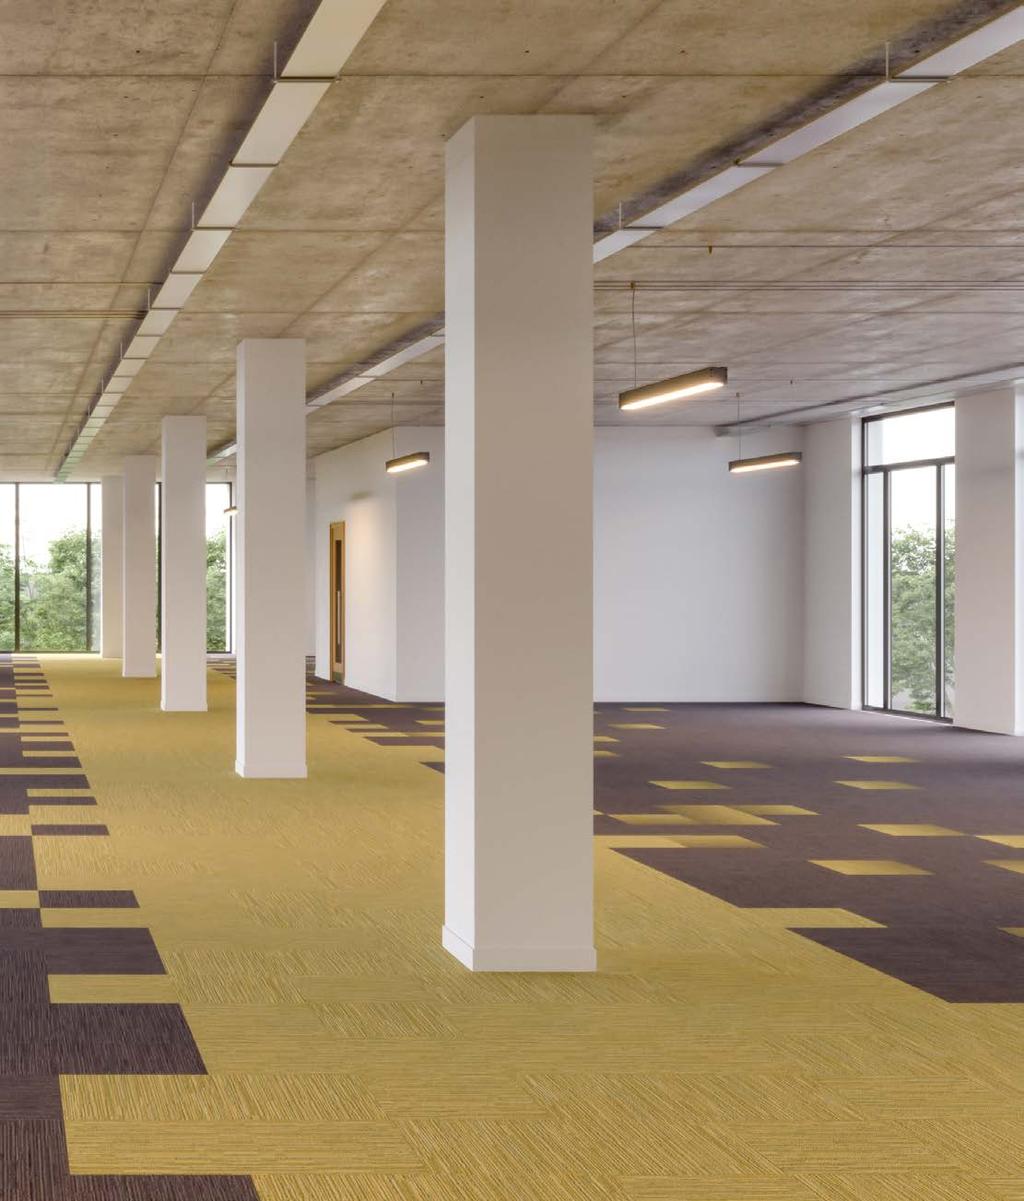 50,000 SQ FT OF OFFICE ACCOMMODATION 3.